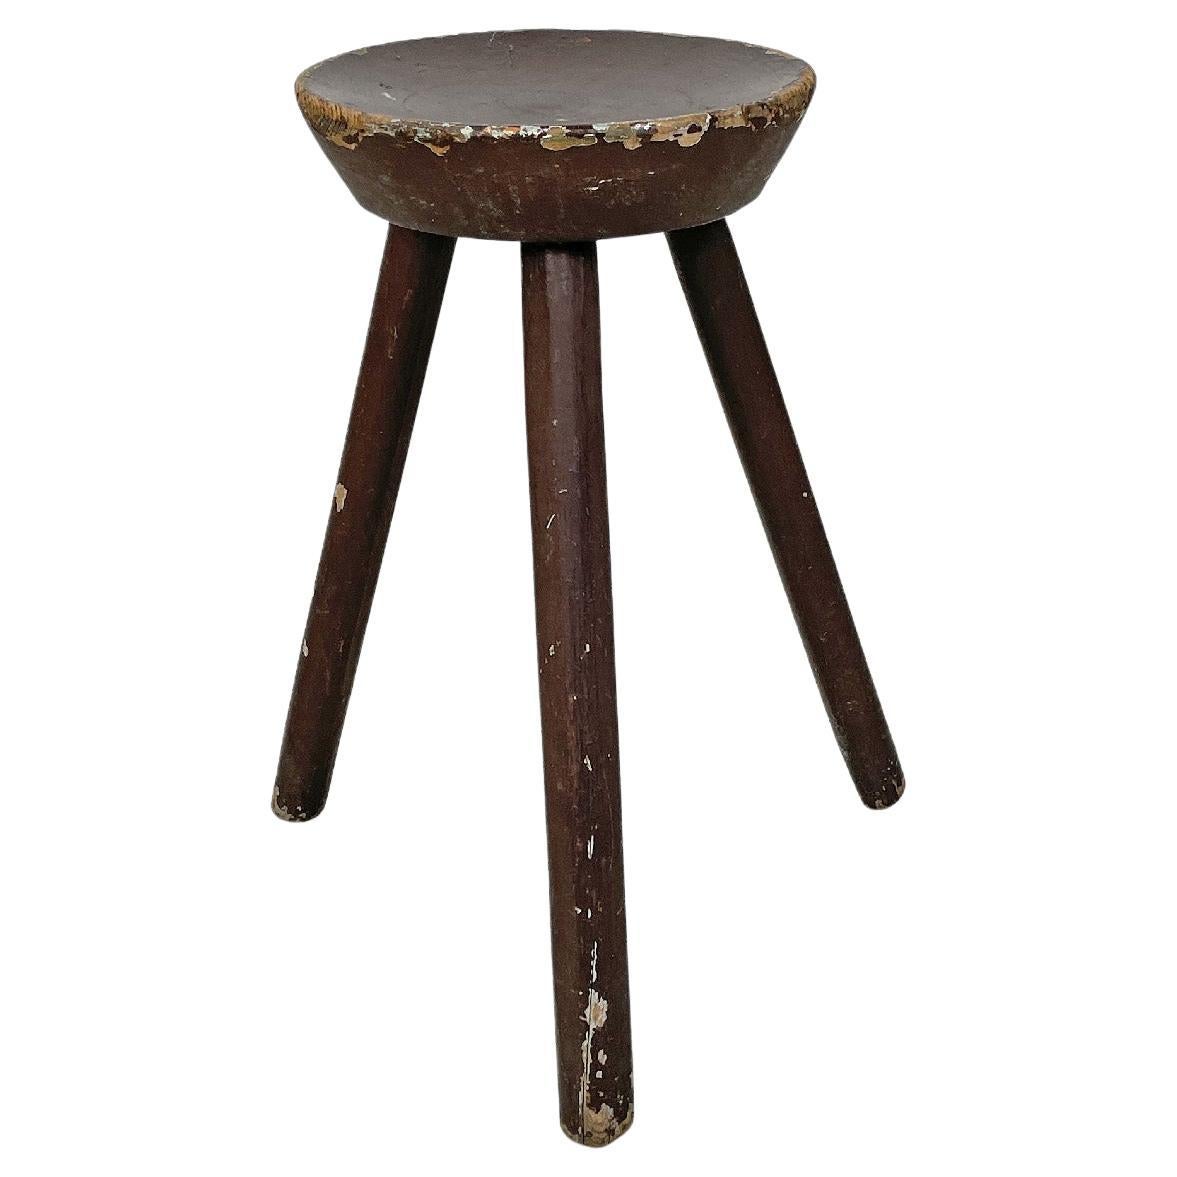 Italian Art Deco brown painted wooden stool with three legs, 1920s For Sale